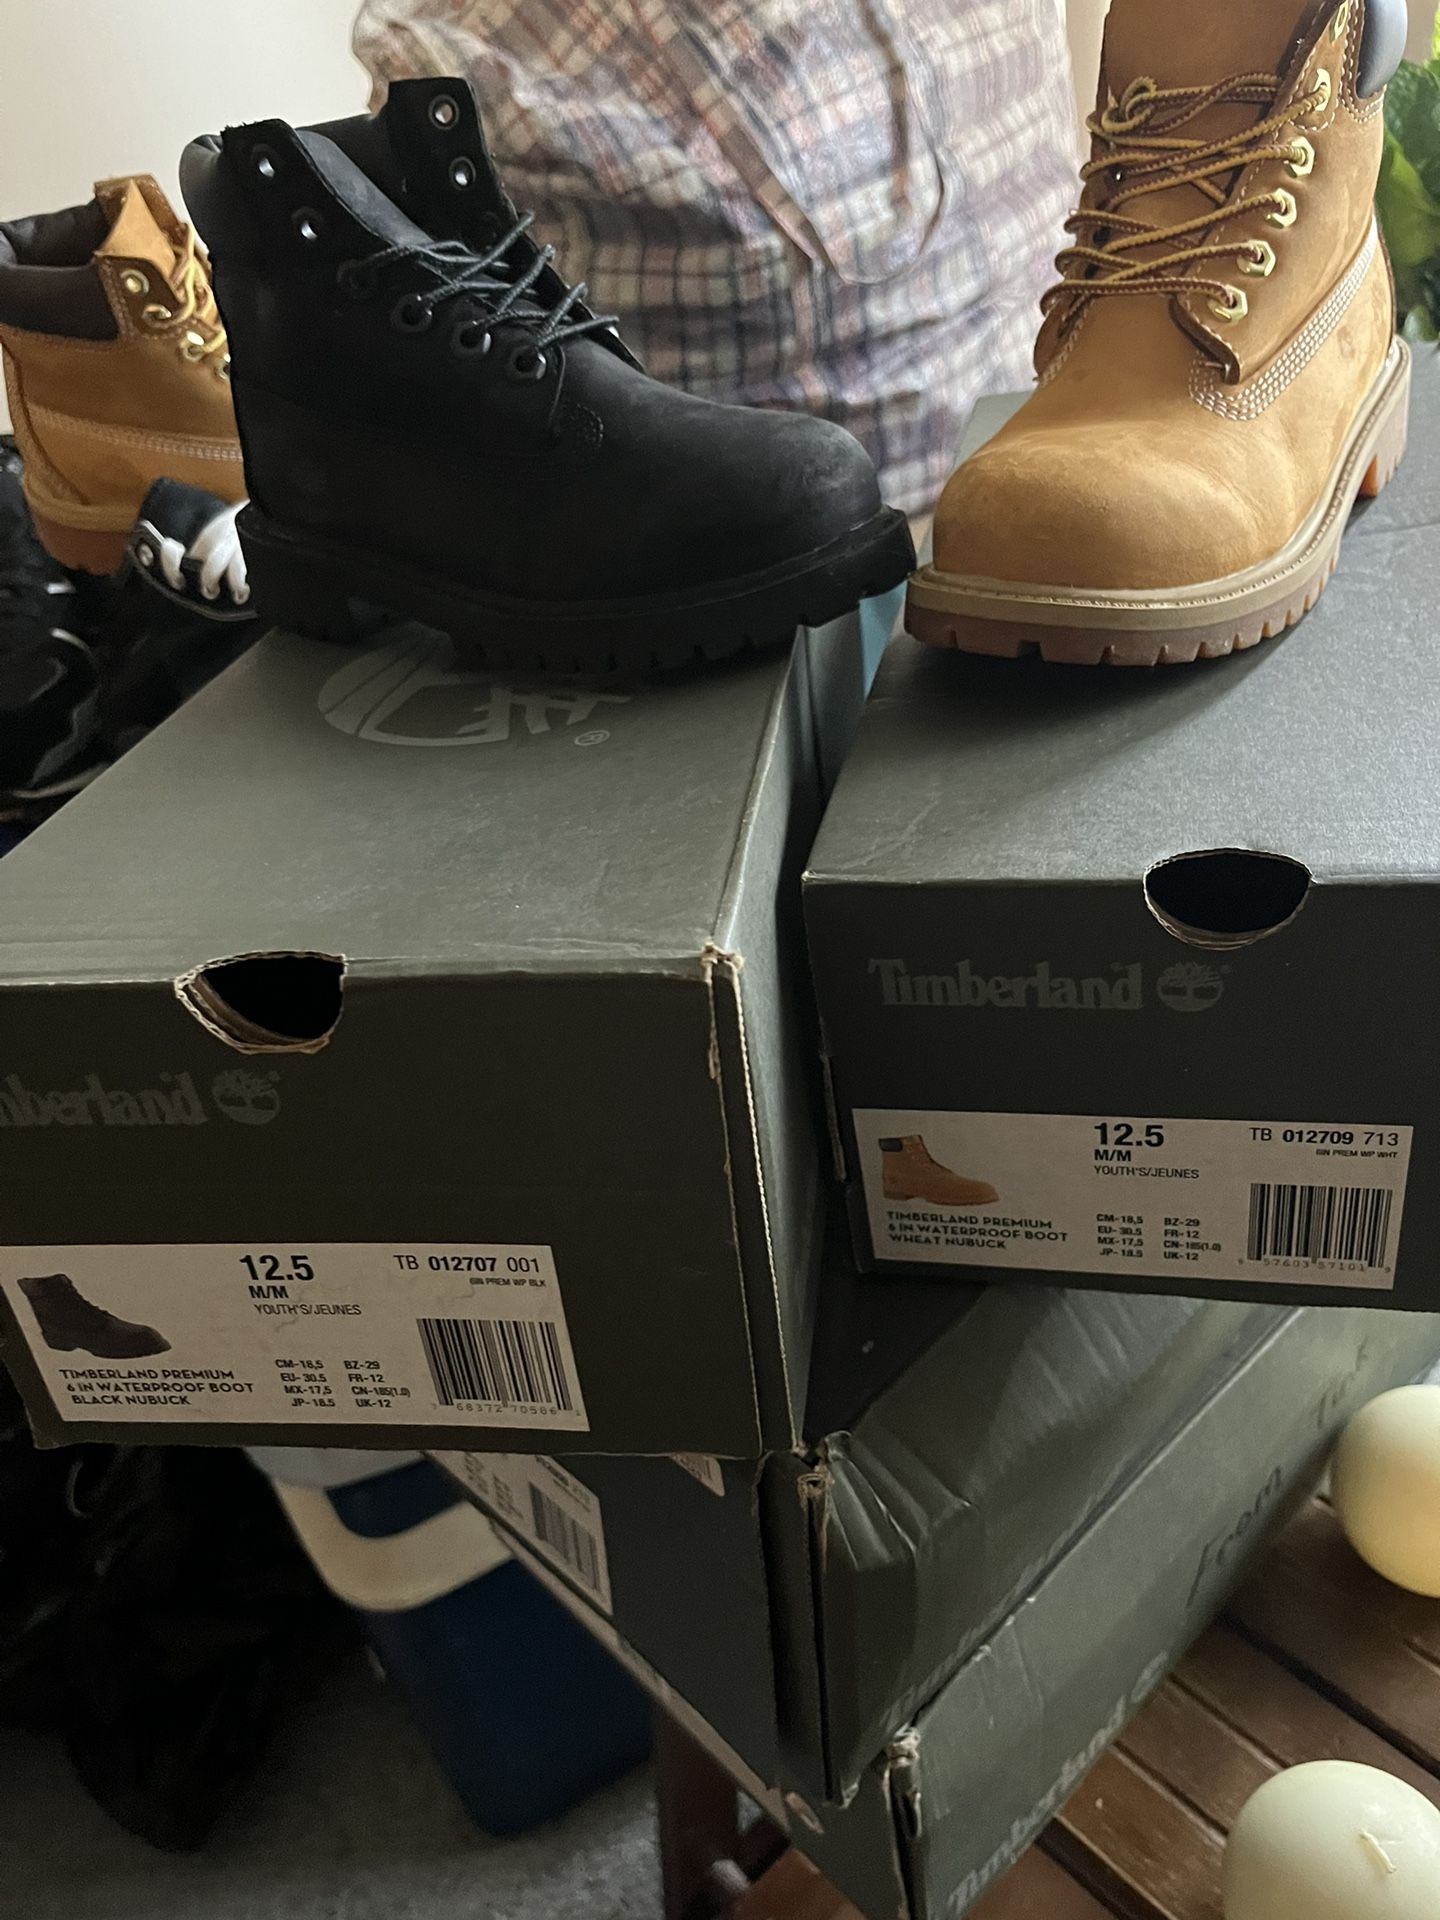 2 pairs Black & Gold Timberlands Boots..Little kids.. Size 12.5 $70 each.. Both for $120.00 very good condition..👇🏽👇🏽